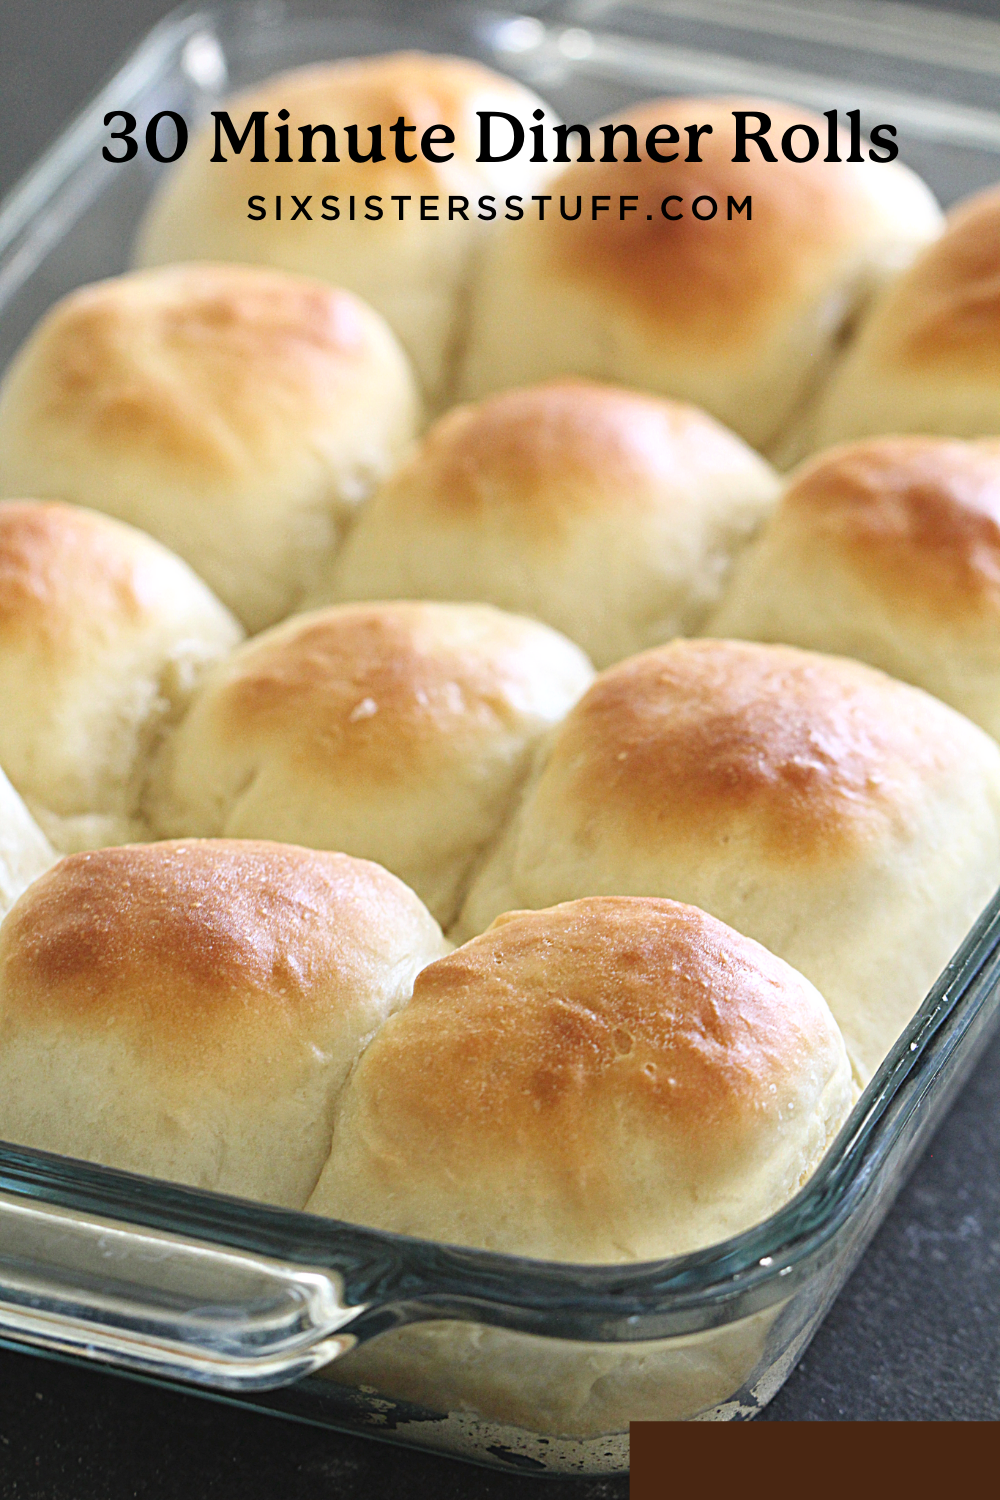 Homemade rolls in a 9x13 inch baking pan with butter on top